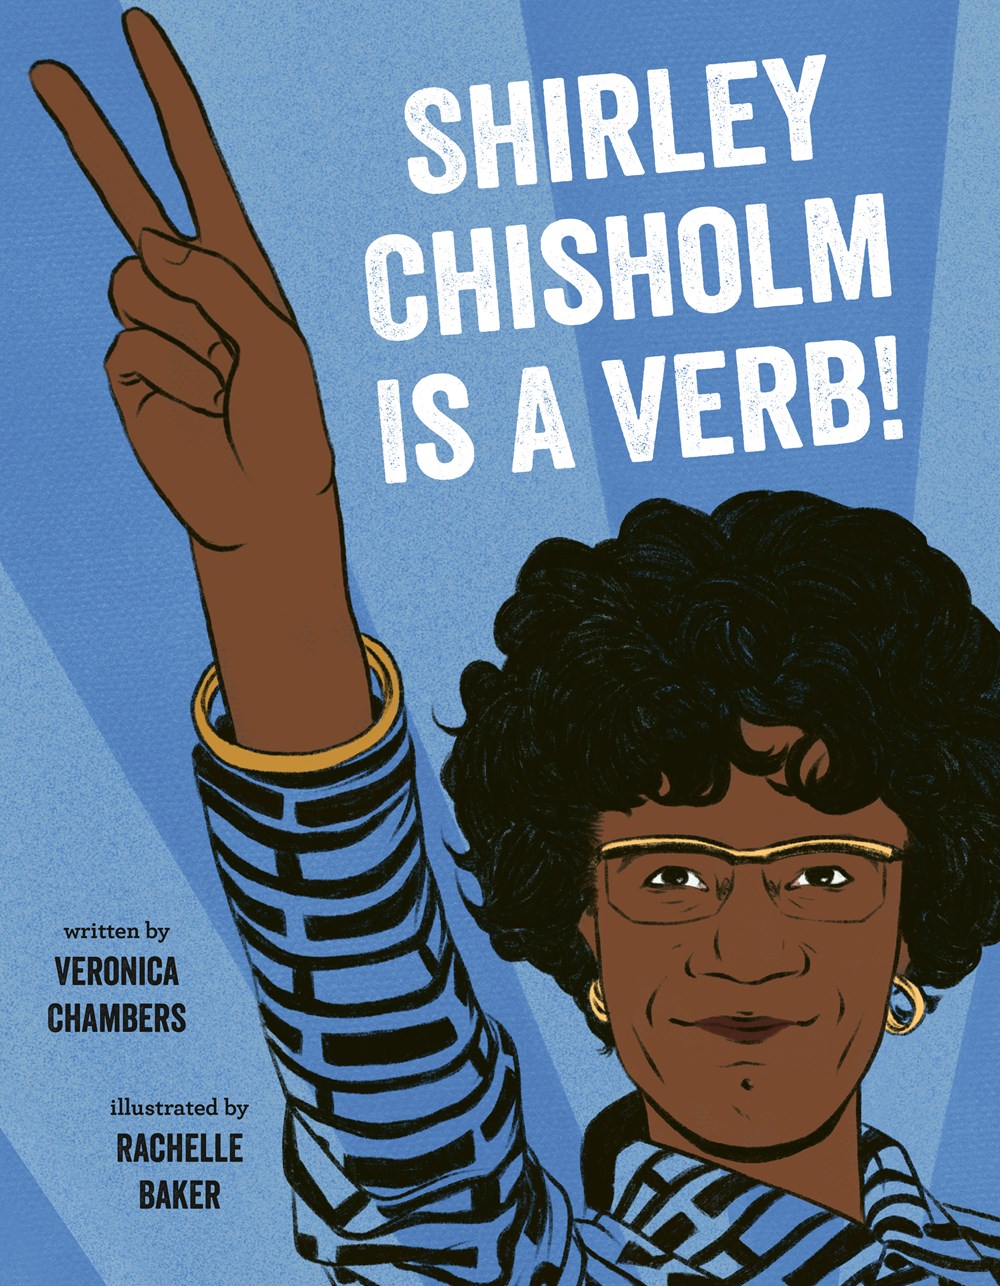 Shirley Chisholm Is a Verb by Veronica Chambers